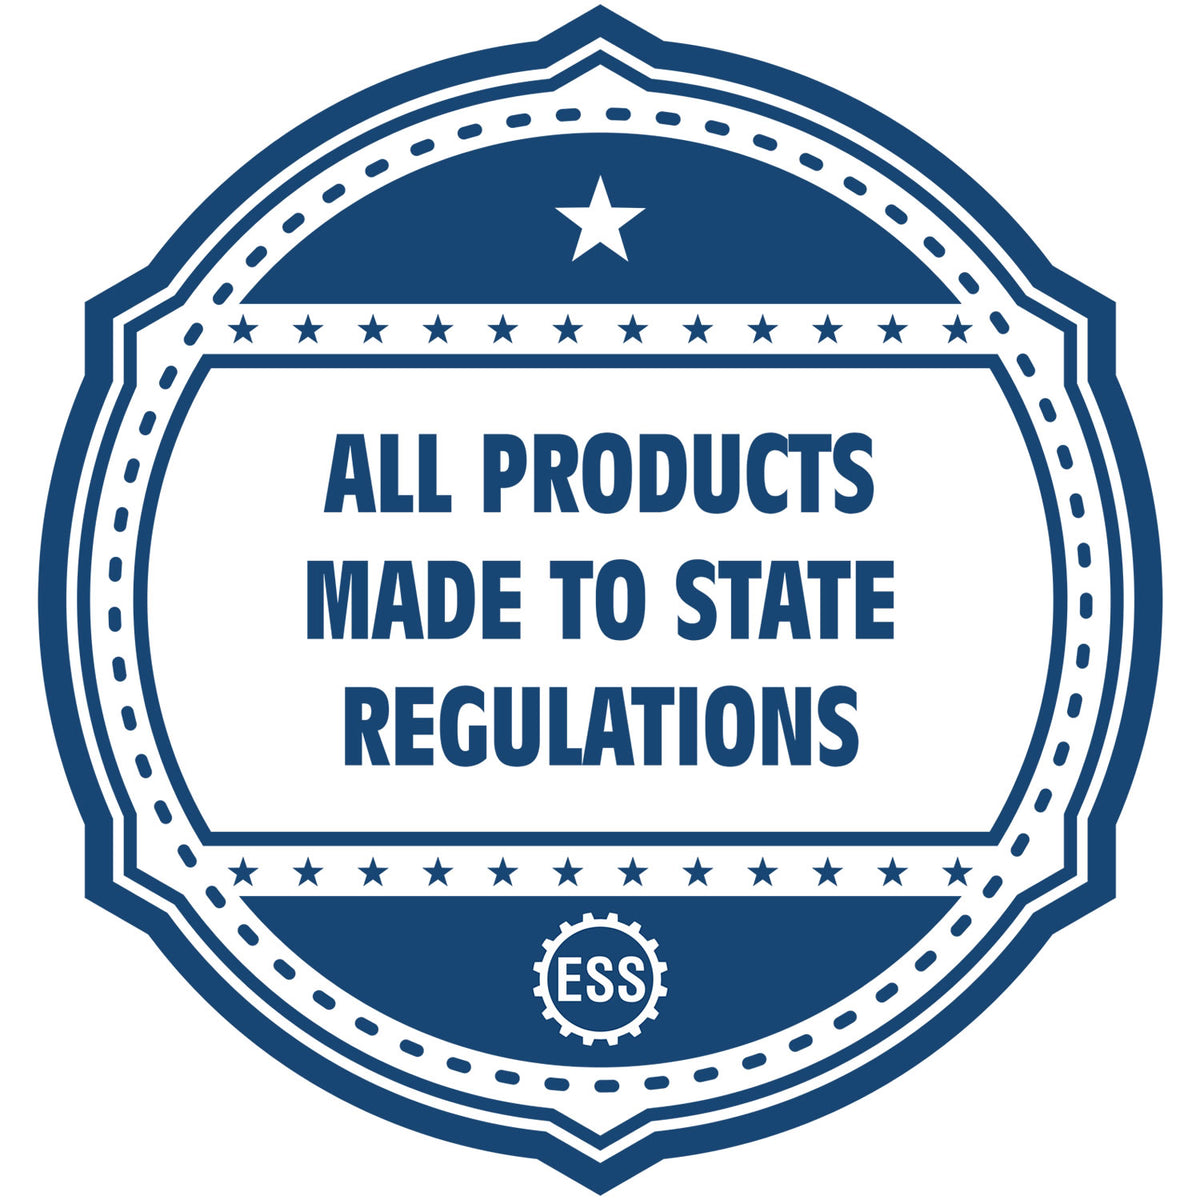 An icon or badge element for the Guam Professional Engineer Seal Stamp showing that this product is made in compliance with state regulations.